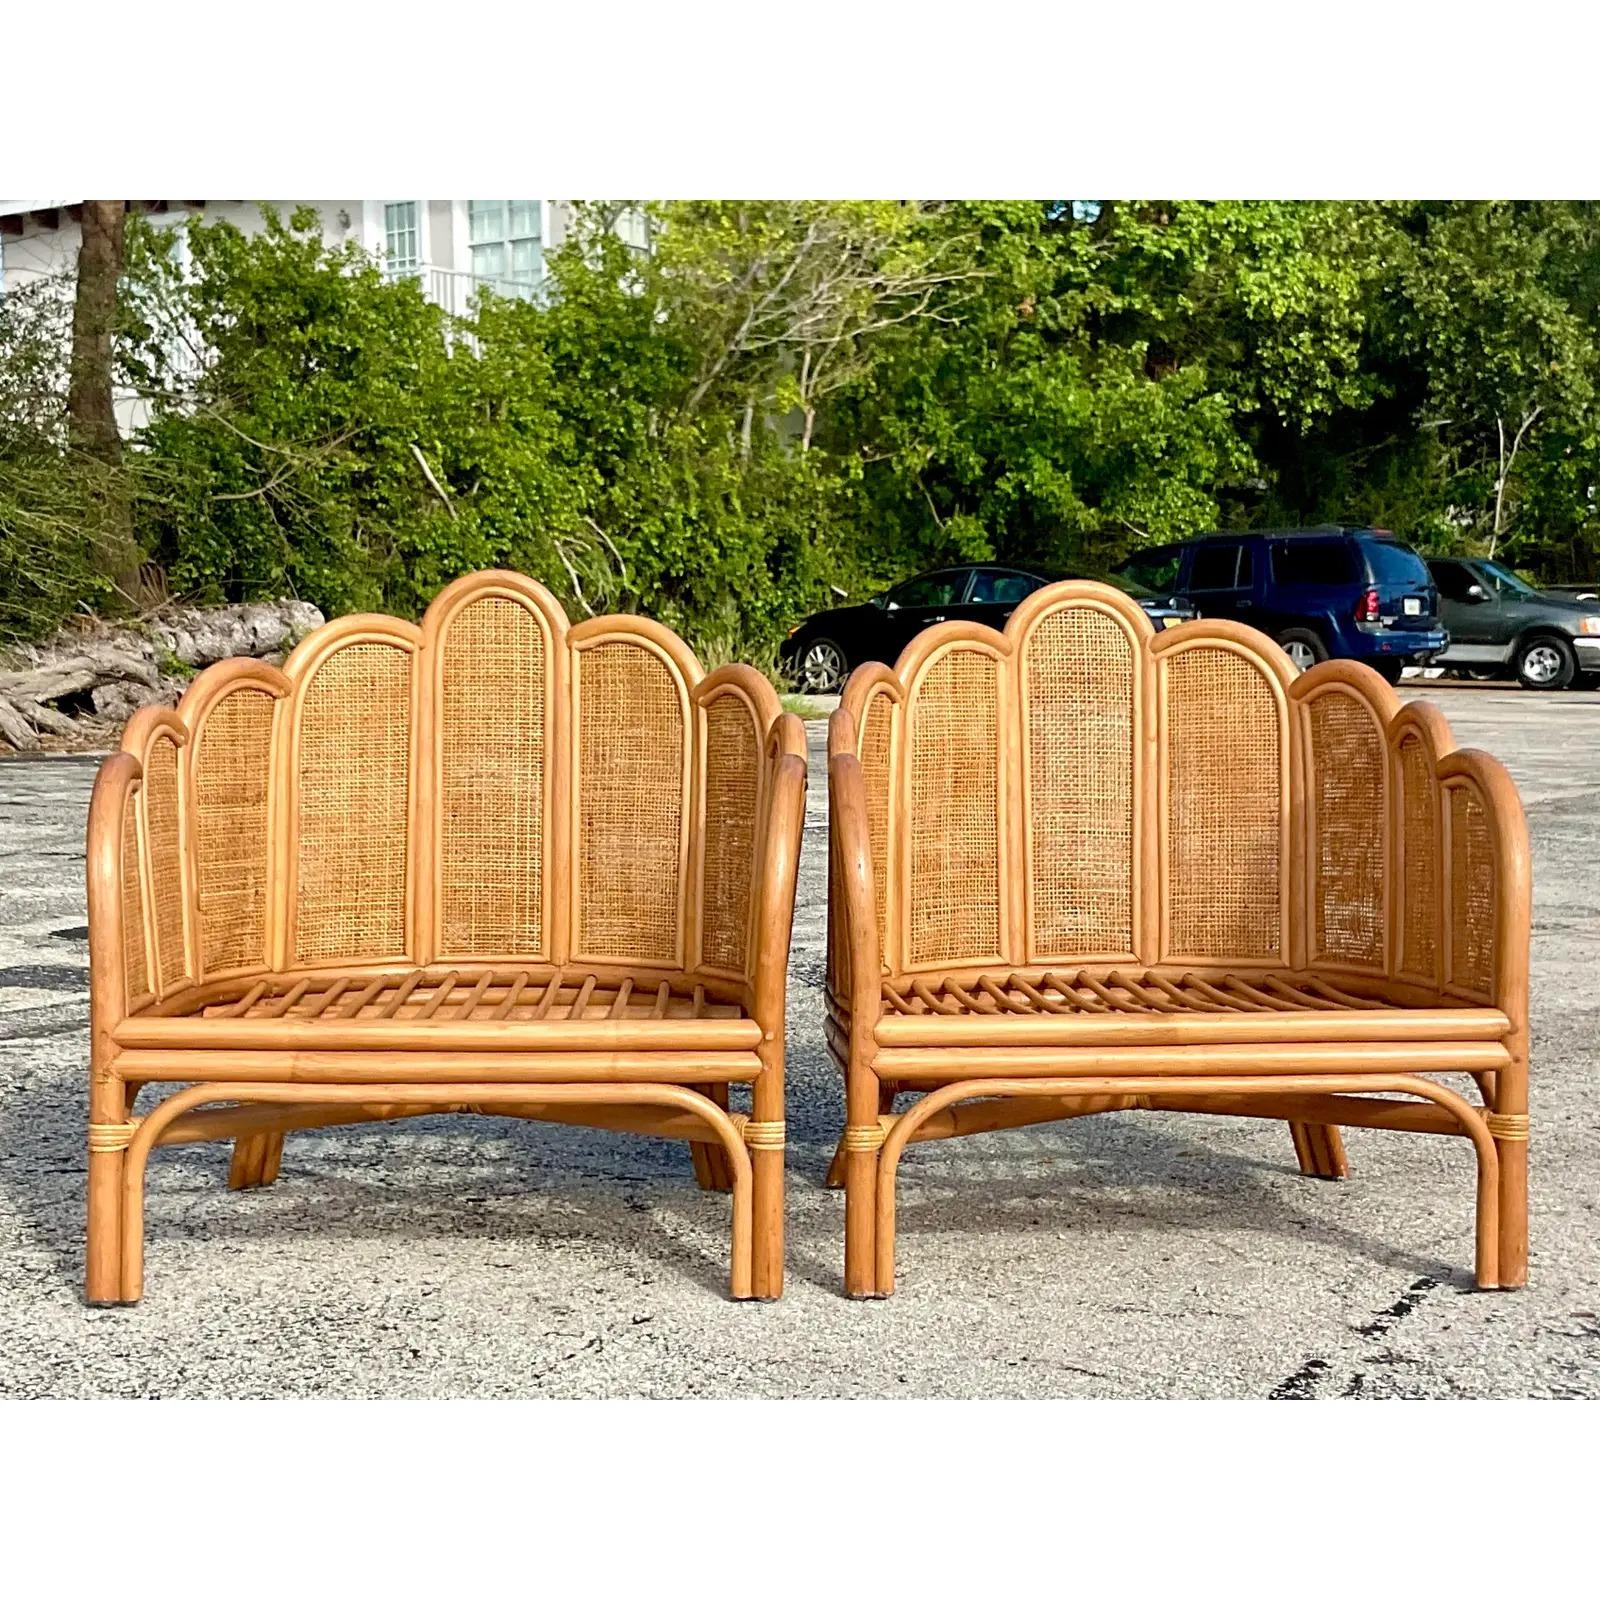 A fabulous pair of Contemporary Coastal lounge chairs. Beautiful scalloped design with chic inset cane panels. Acquired from a Palm Beach estate.